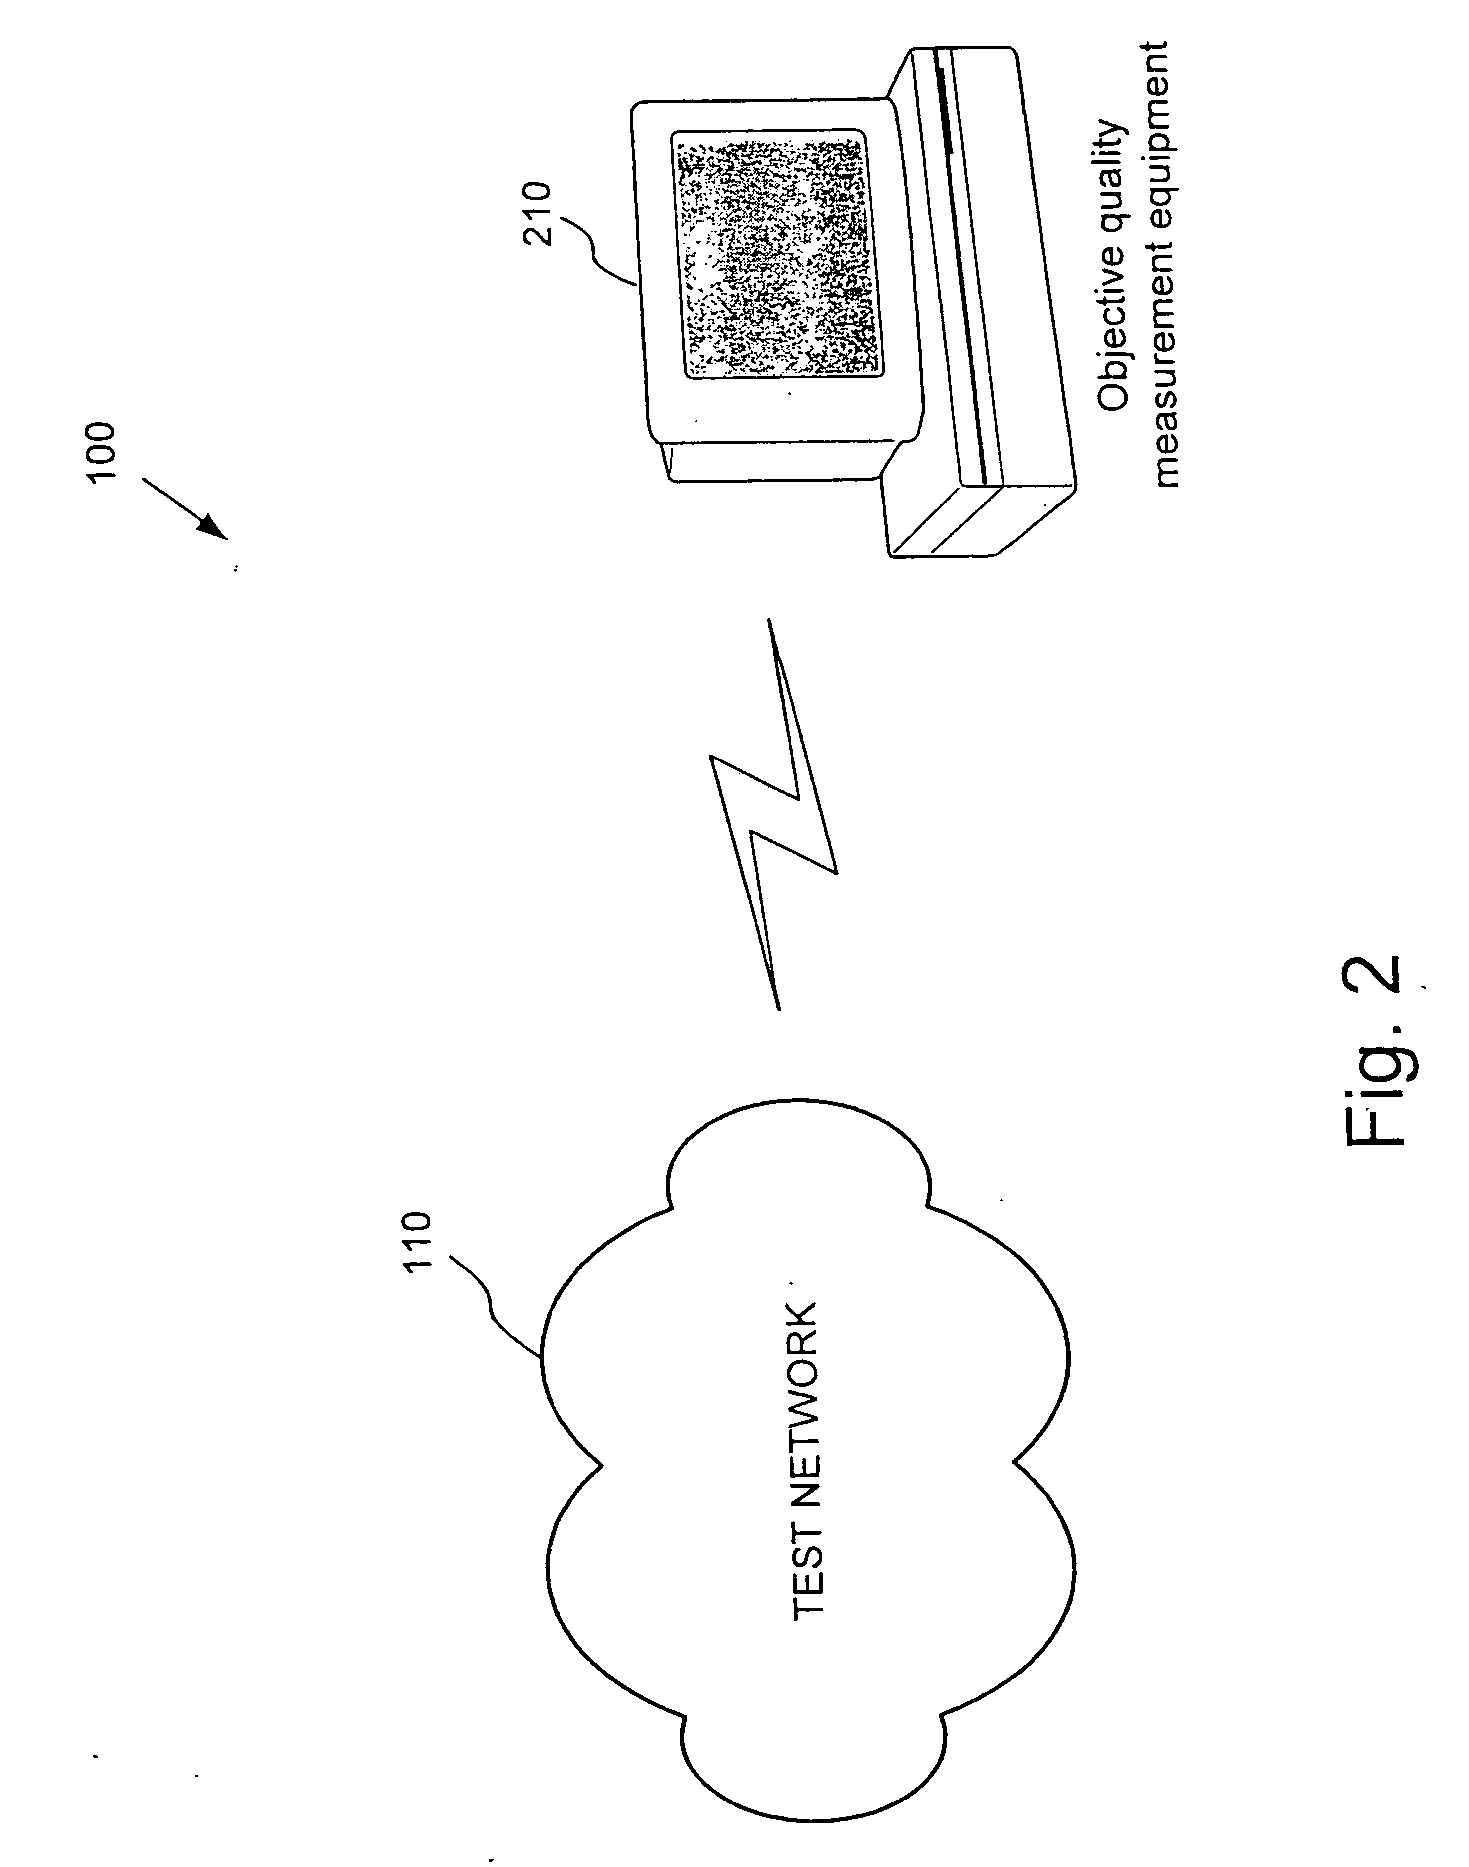 Systems and methods for automatic evaluation of subjective quality of packetized telecommunication signals while varying implementation parameters